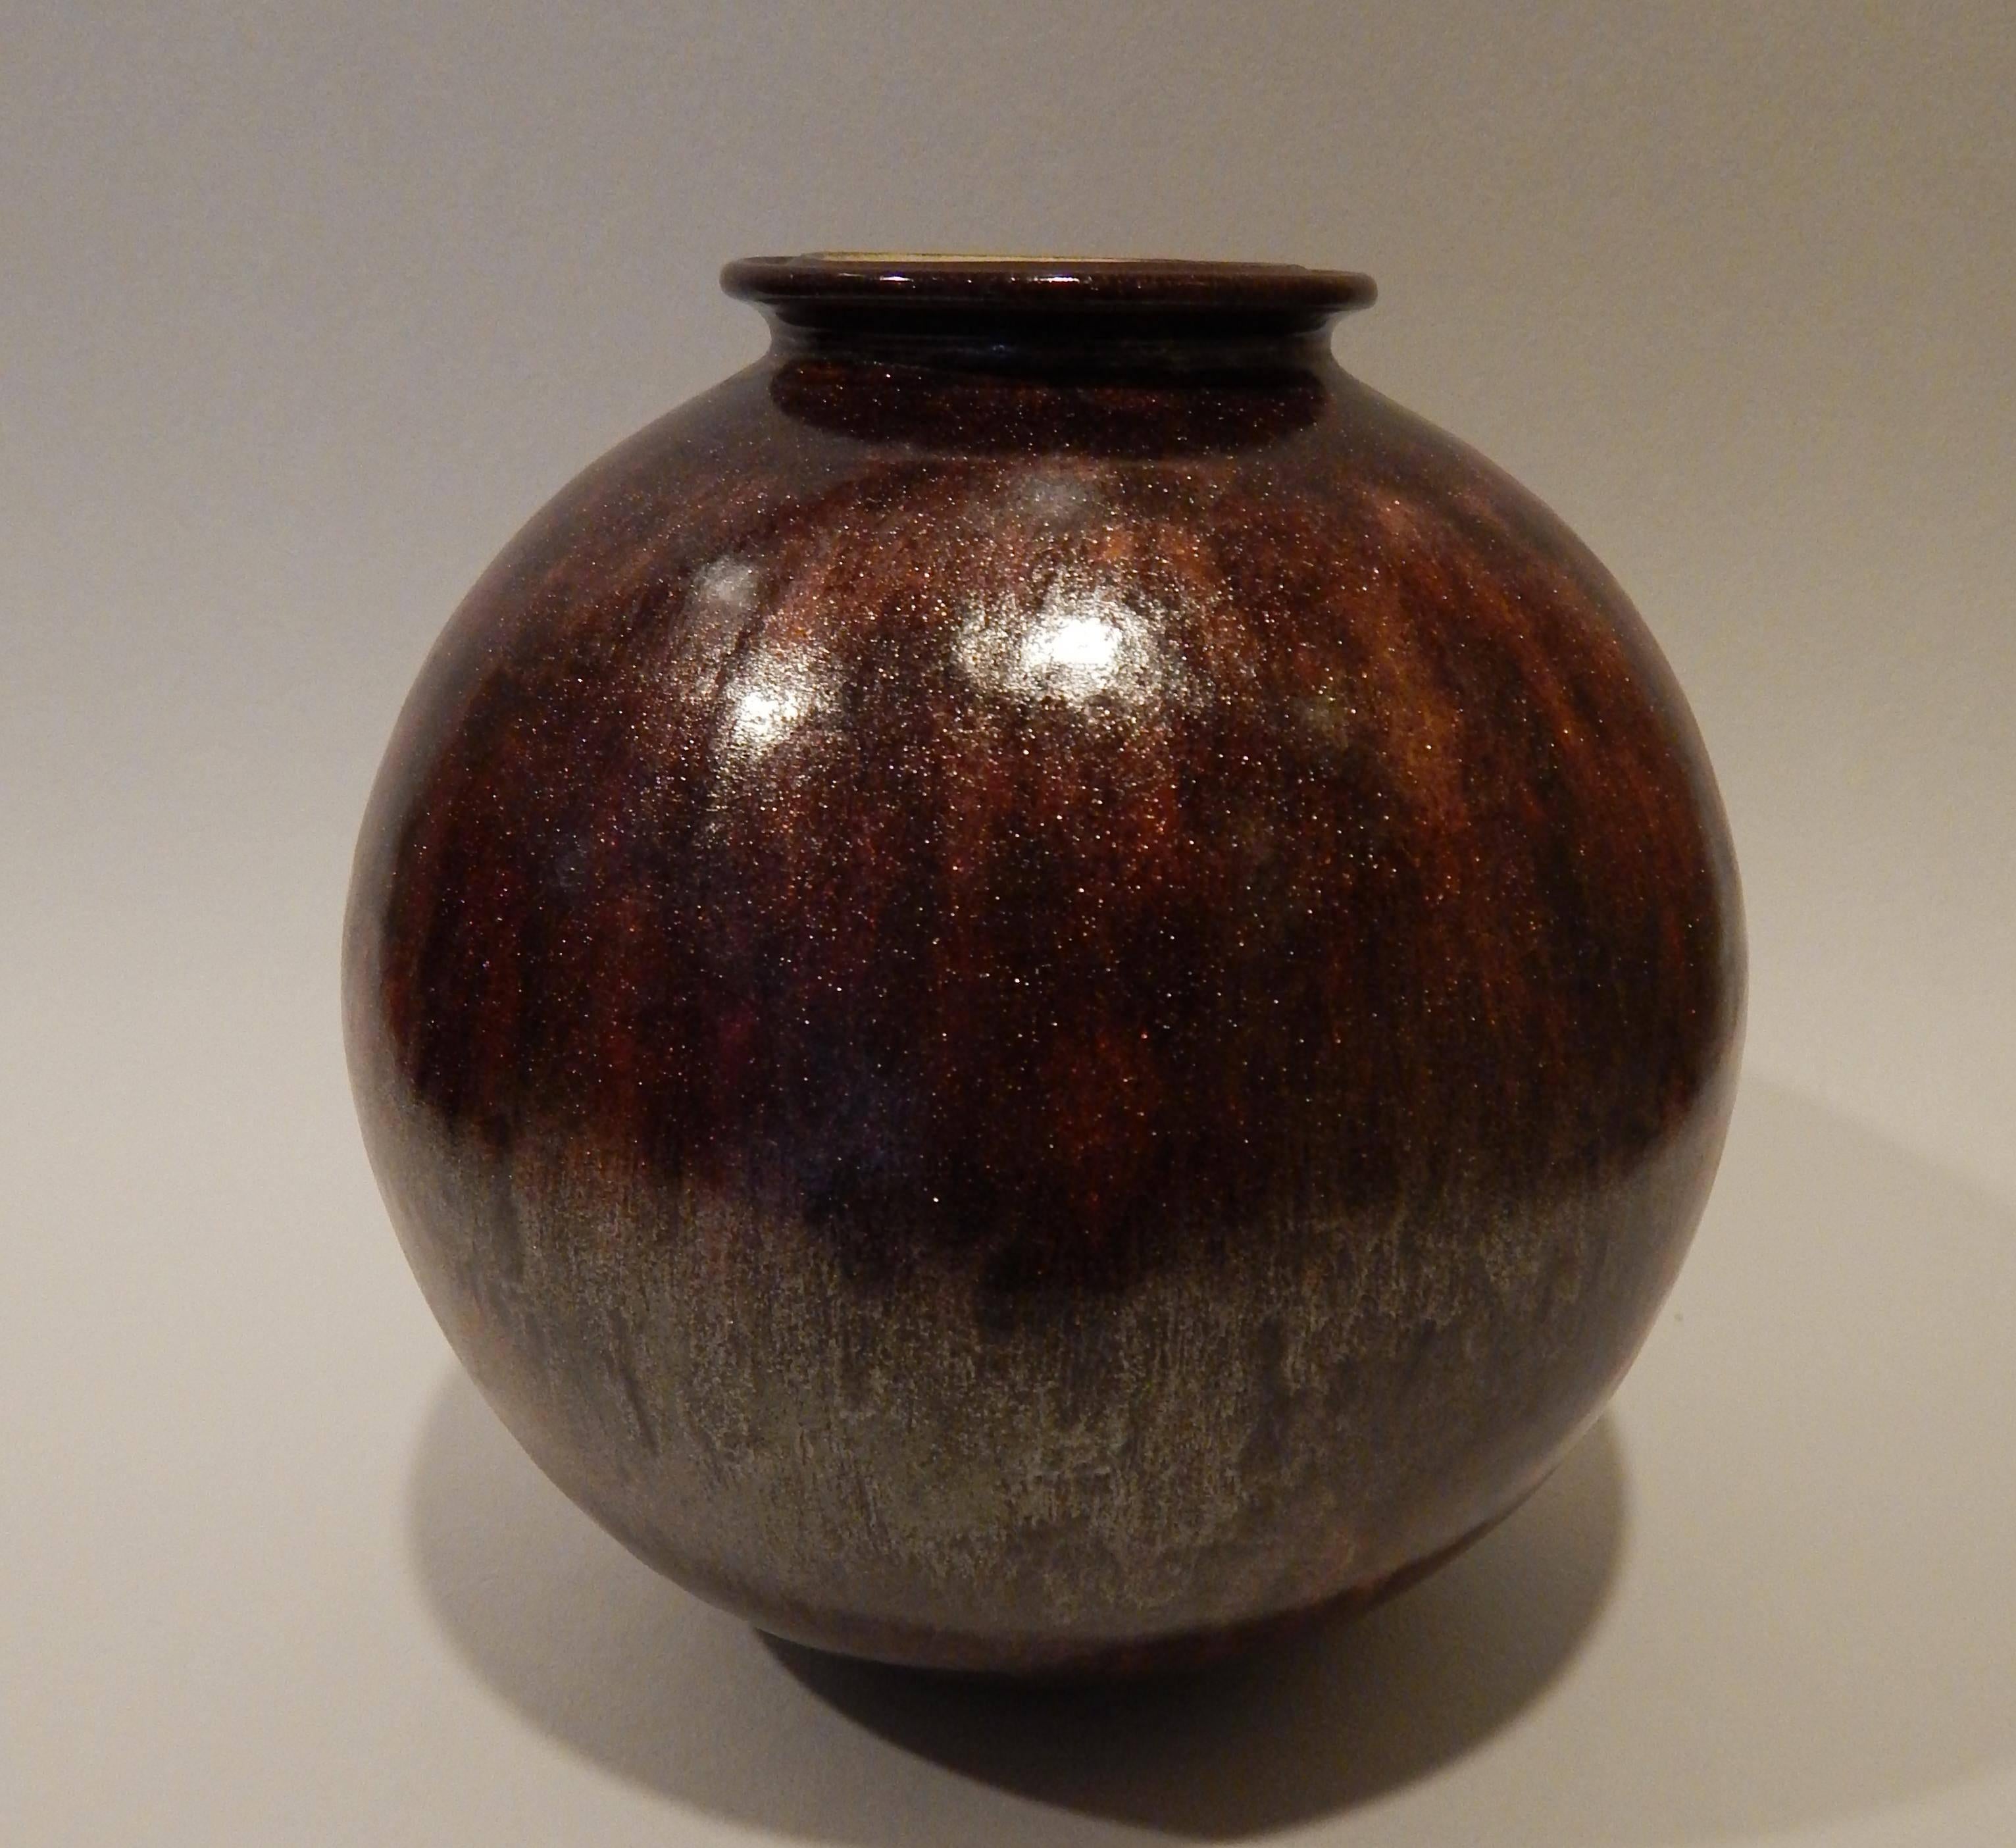 James Lovera (1920-2015) ceramic studio vase.
This beautiful vase by James Lovera has a wonderful
and unusual copper colored glaze and dates to the 1960s,
perhaps as early as the 1950s.
In excellent condition and signed on the underside: